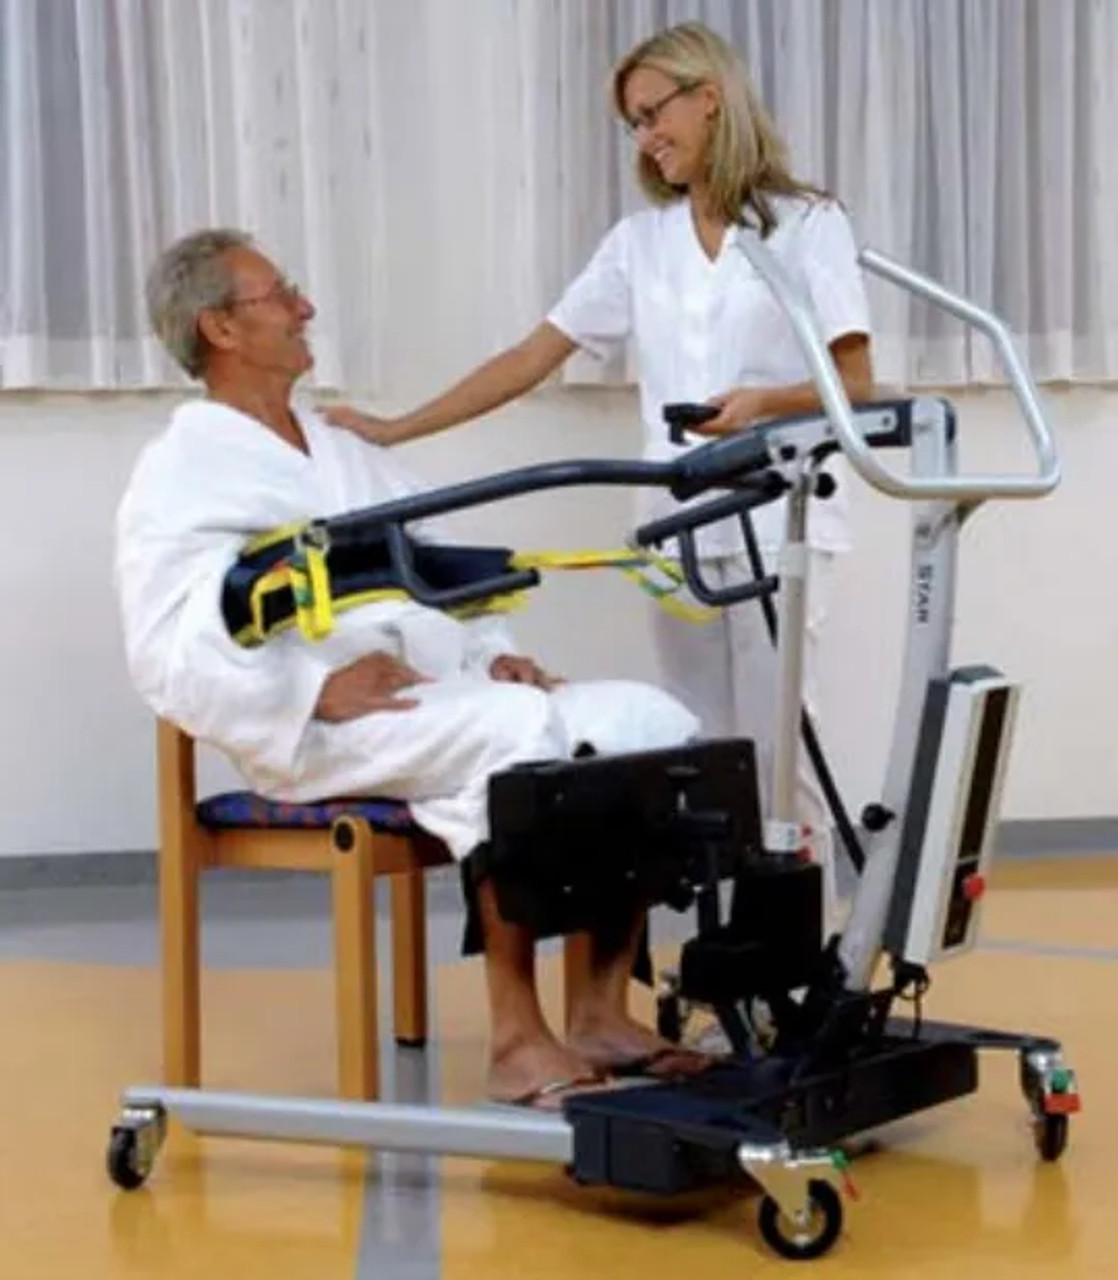 Polaris Count 440 Standing Patient Lift | Safe Mobility Support up to 440 lbs-Chicken Pieces